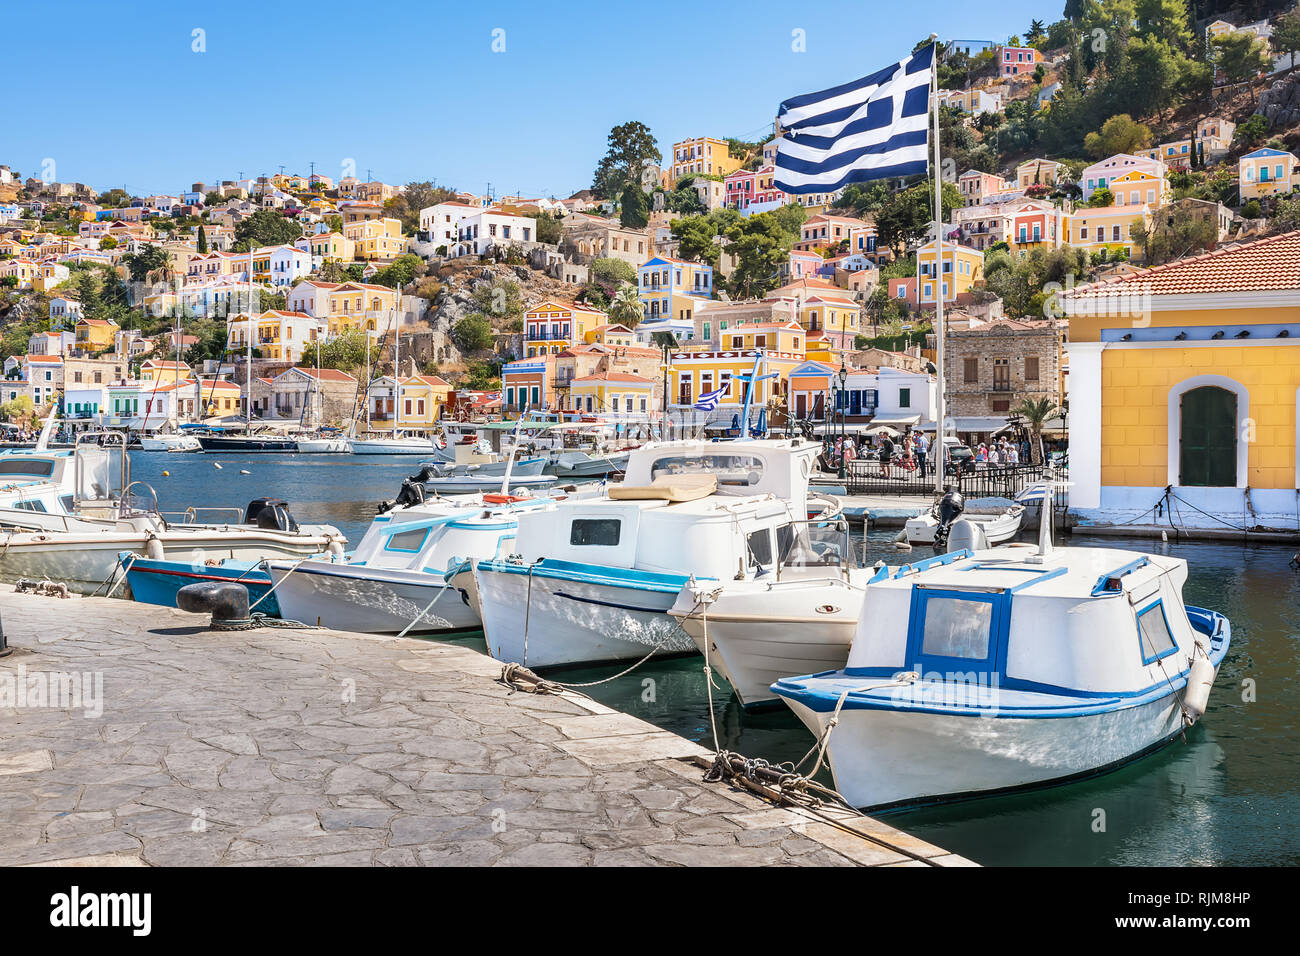 Greek flag, boats and colorful neoclassical houses in harbor town of Symi (Symi Island, Greece) Stock Photo